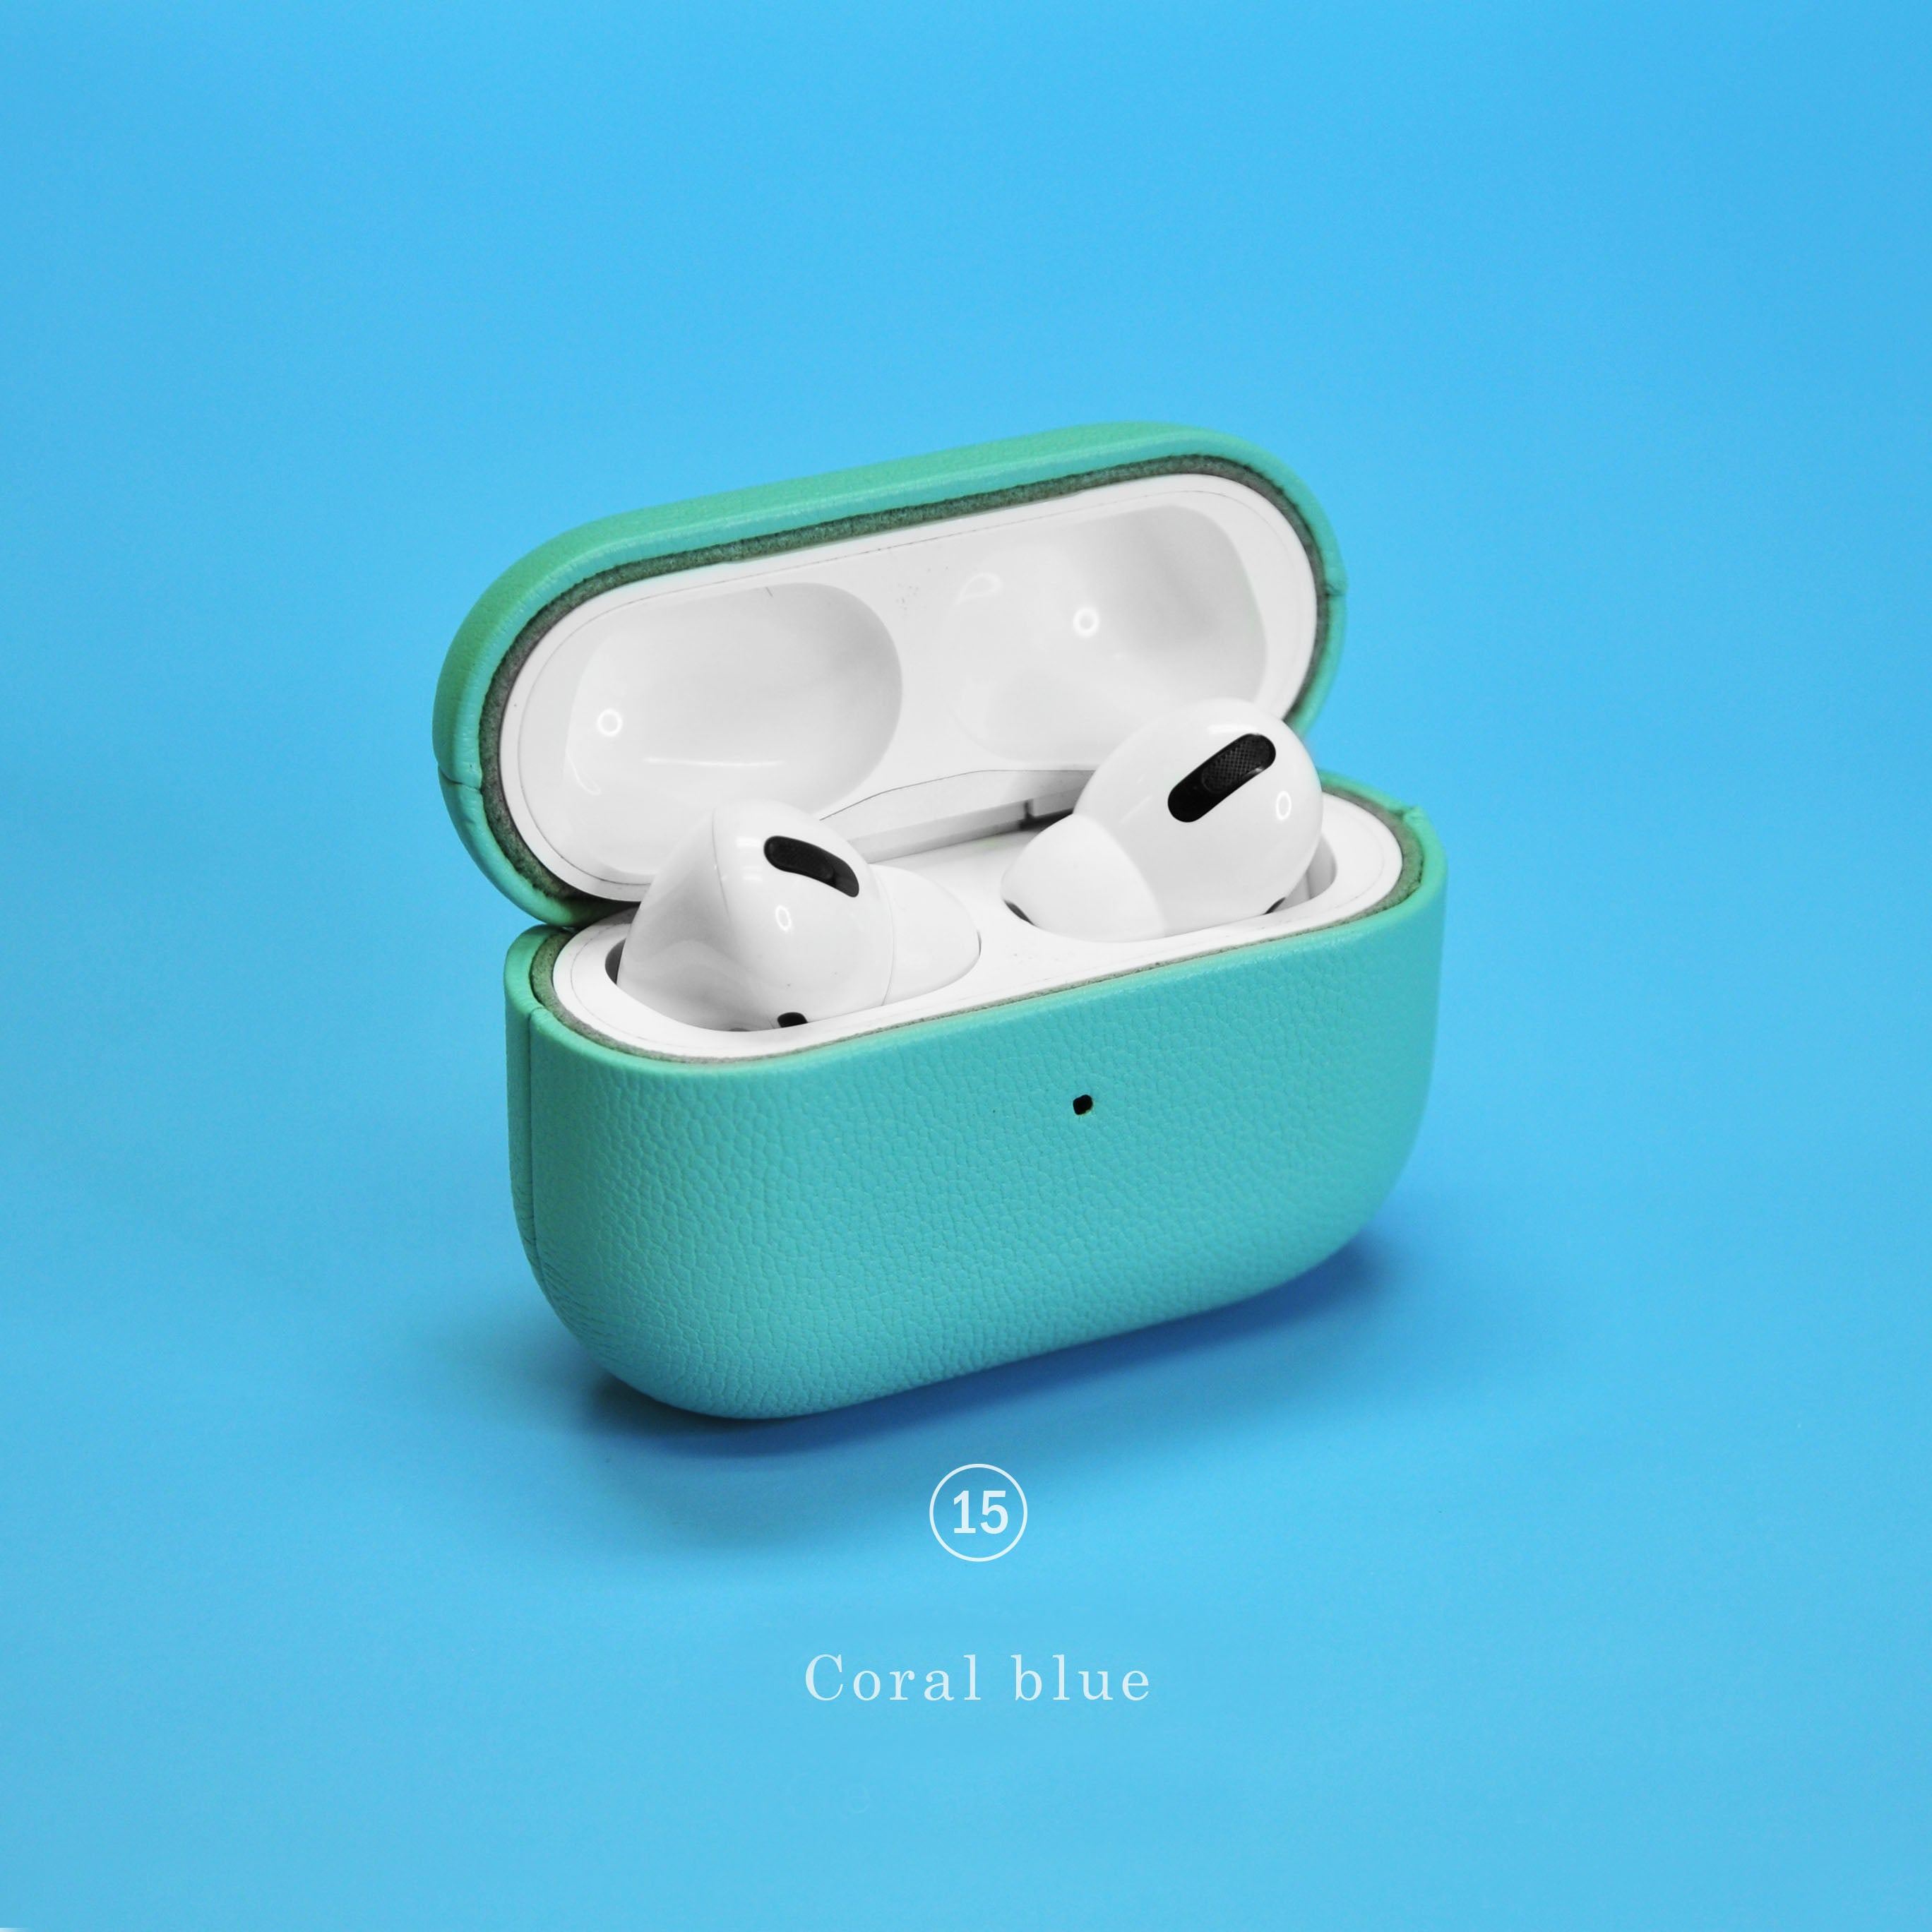 Coral Blue Leather AirPod Case